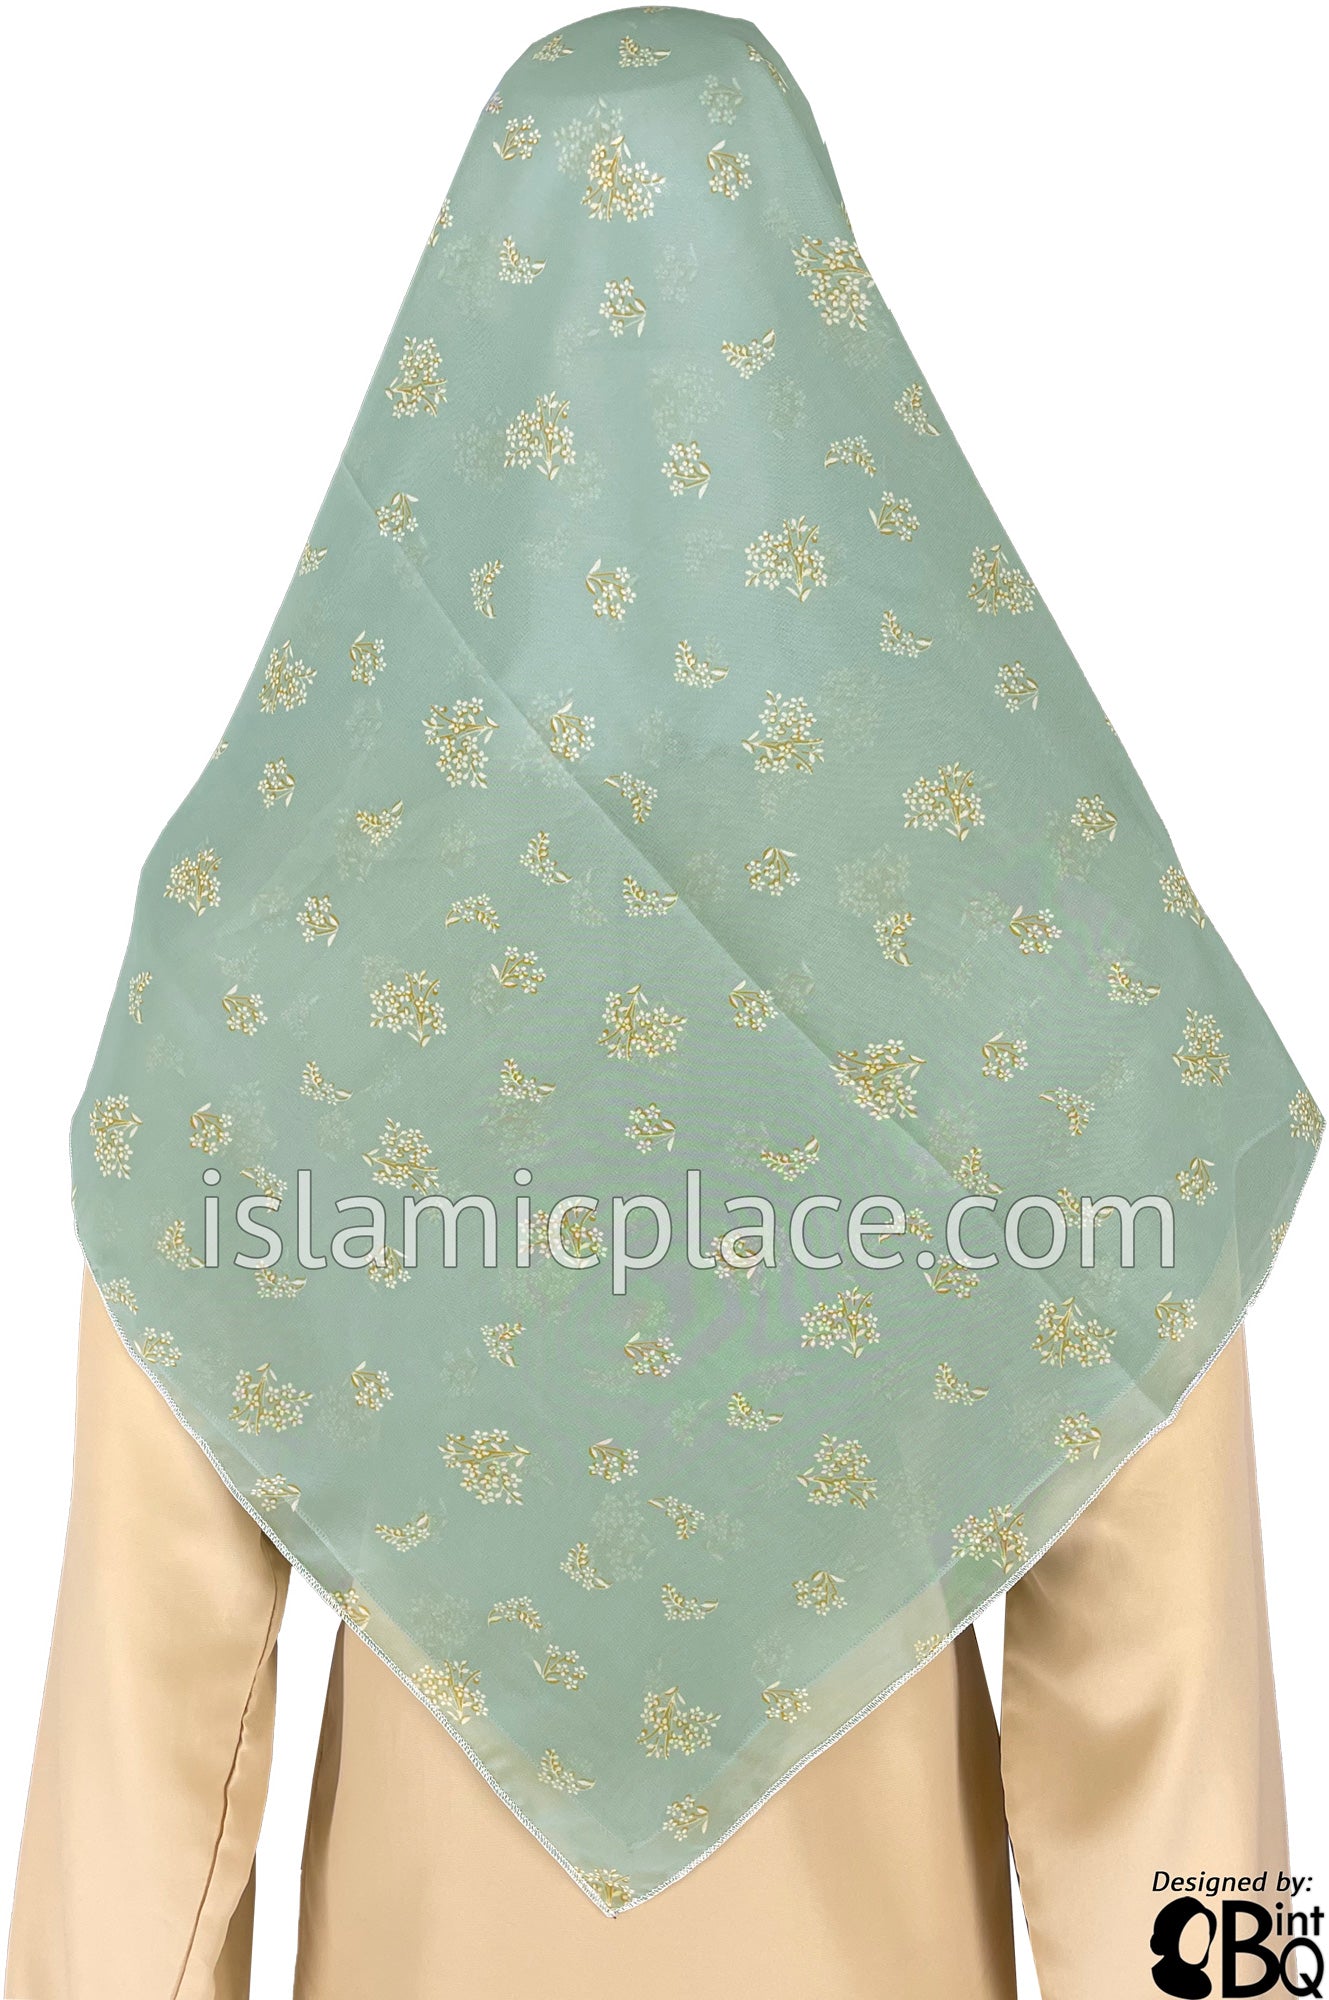 Mustard and White Flower Bunches on Gray - 45" Square Printed Khimar